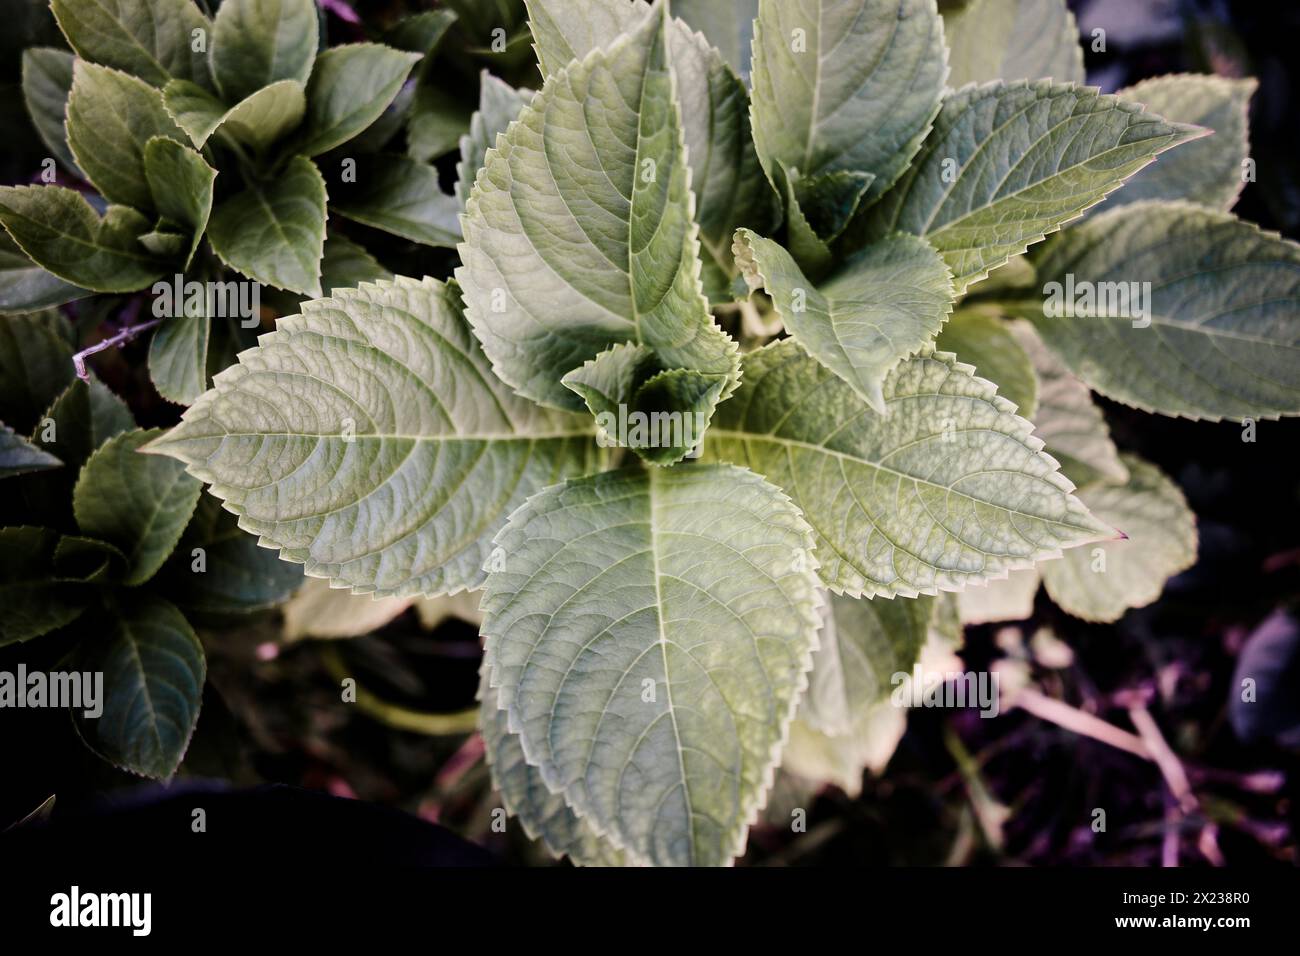 set of leaves of the sage plant Stock Photo